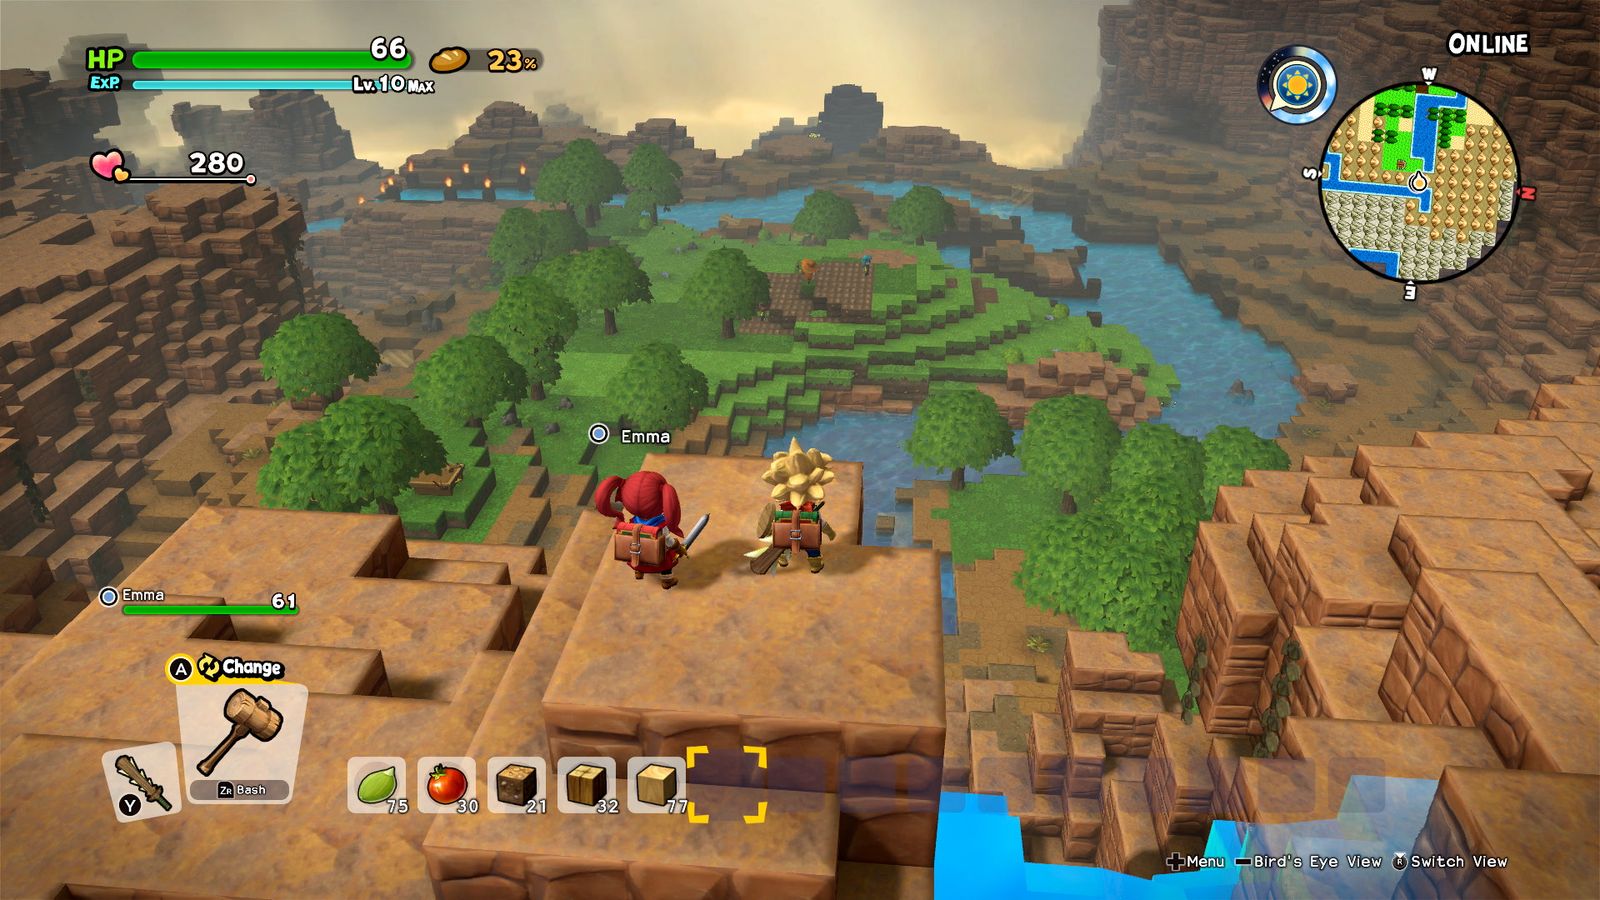 In-game image from Dragon Quest Builders 2 of two characters standing on top of a brown mountain looking out over a river and trees below.